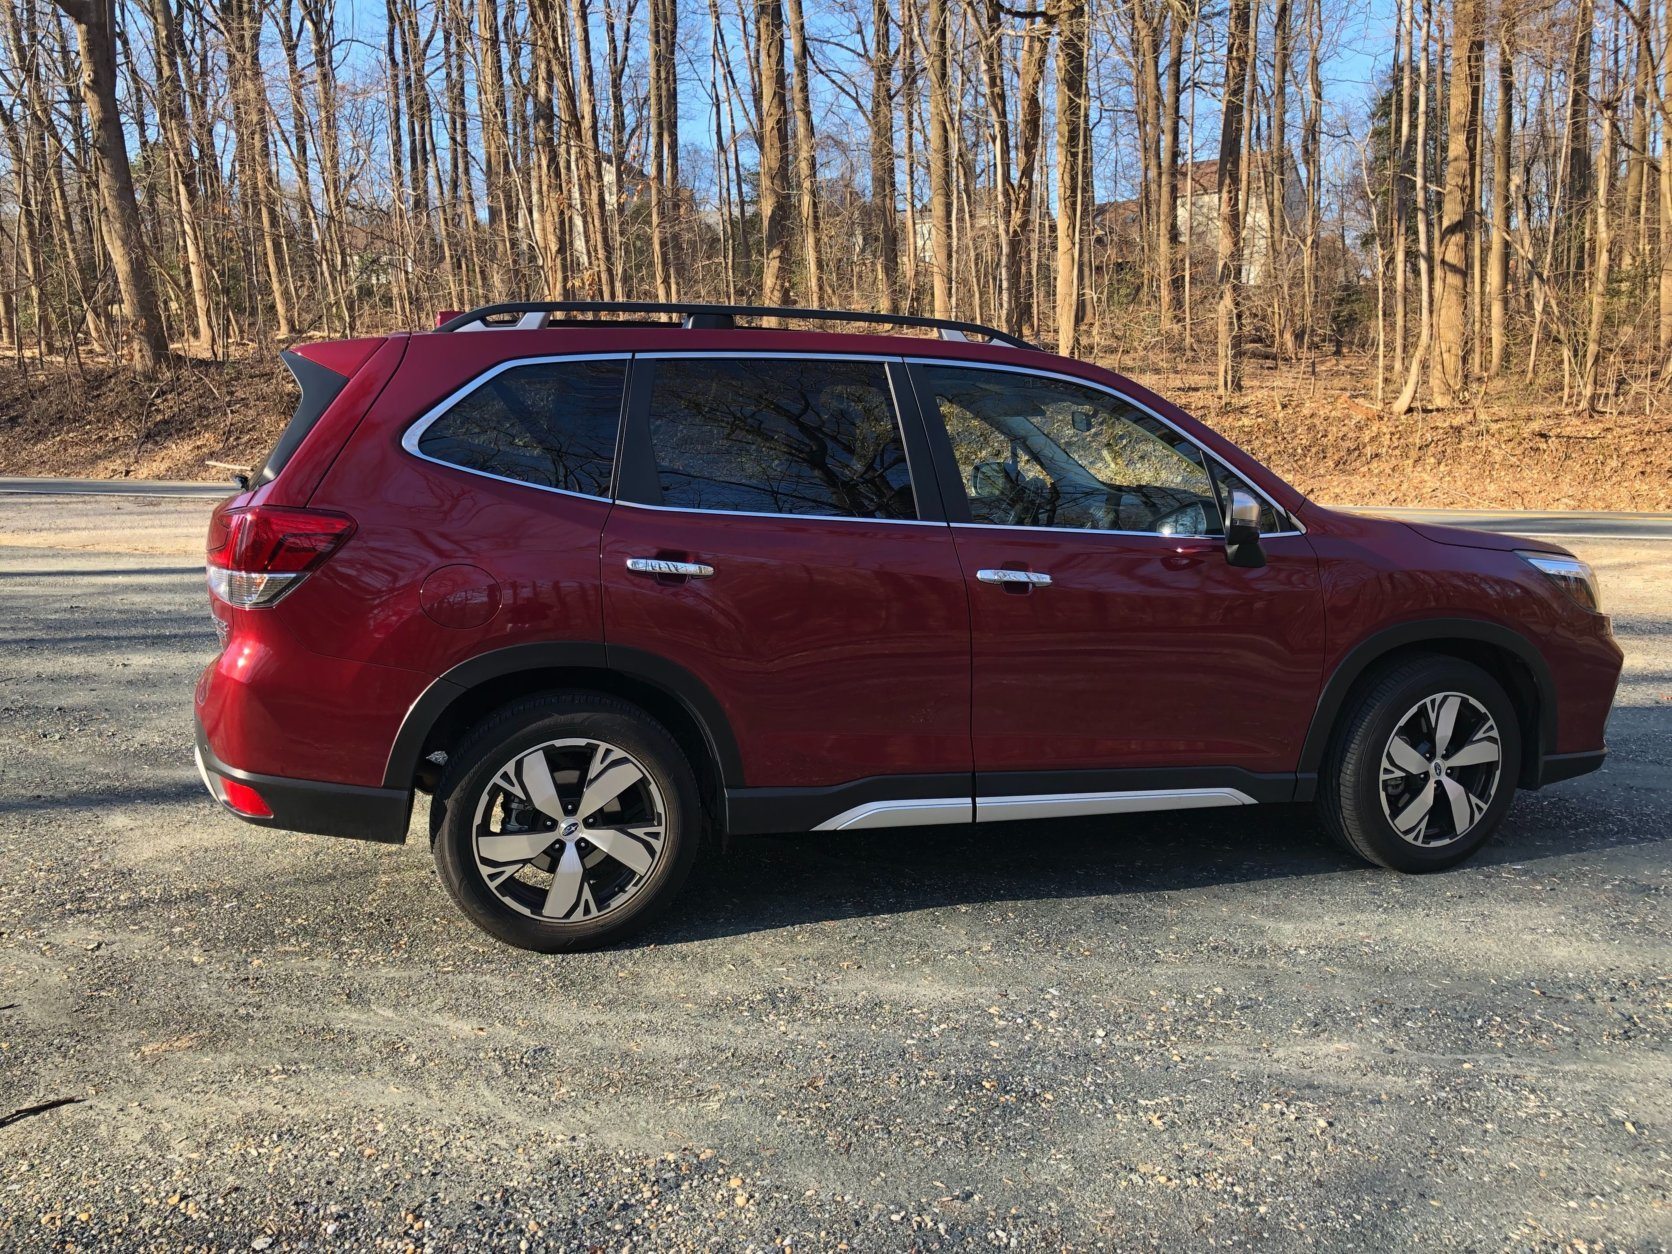 <p>The optional powerful turbo engine from the old Forester is no longer available. The CVT transmission was a surprise with its smoother operation. It acts like a normal automatic with less droning on acceleration.</p>
<p>Fuel economy was good too. I managed 28 mpg for my week of driving.</p>
